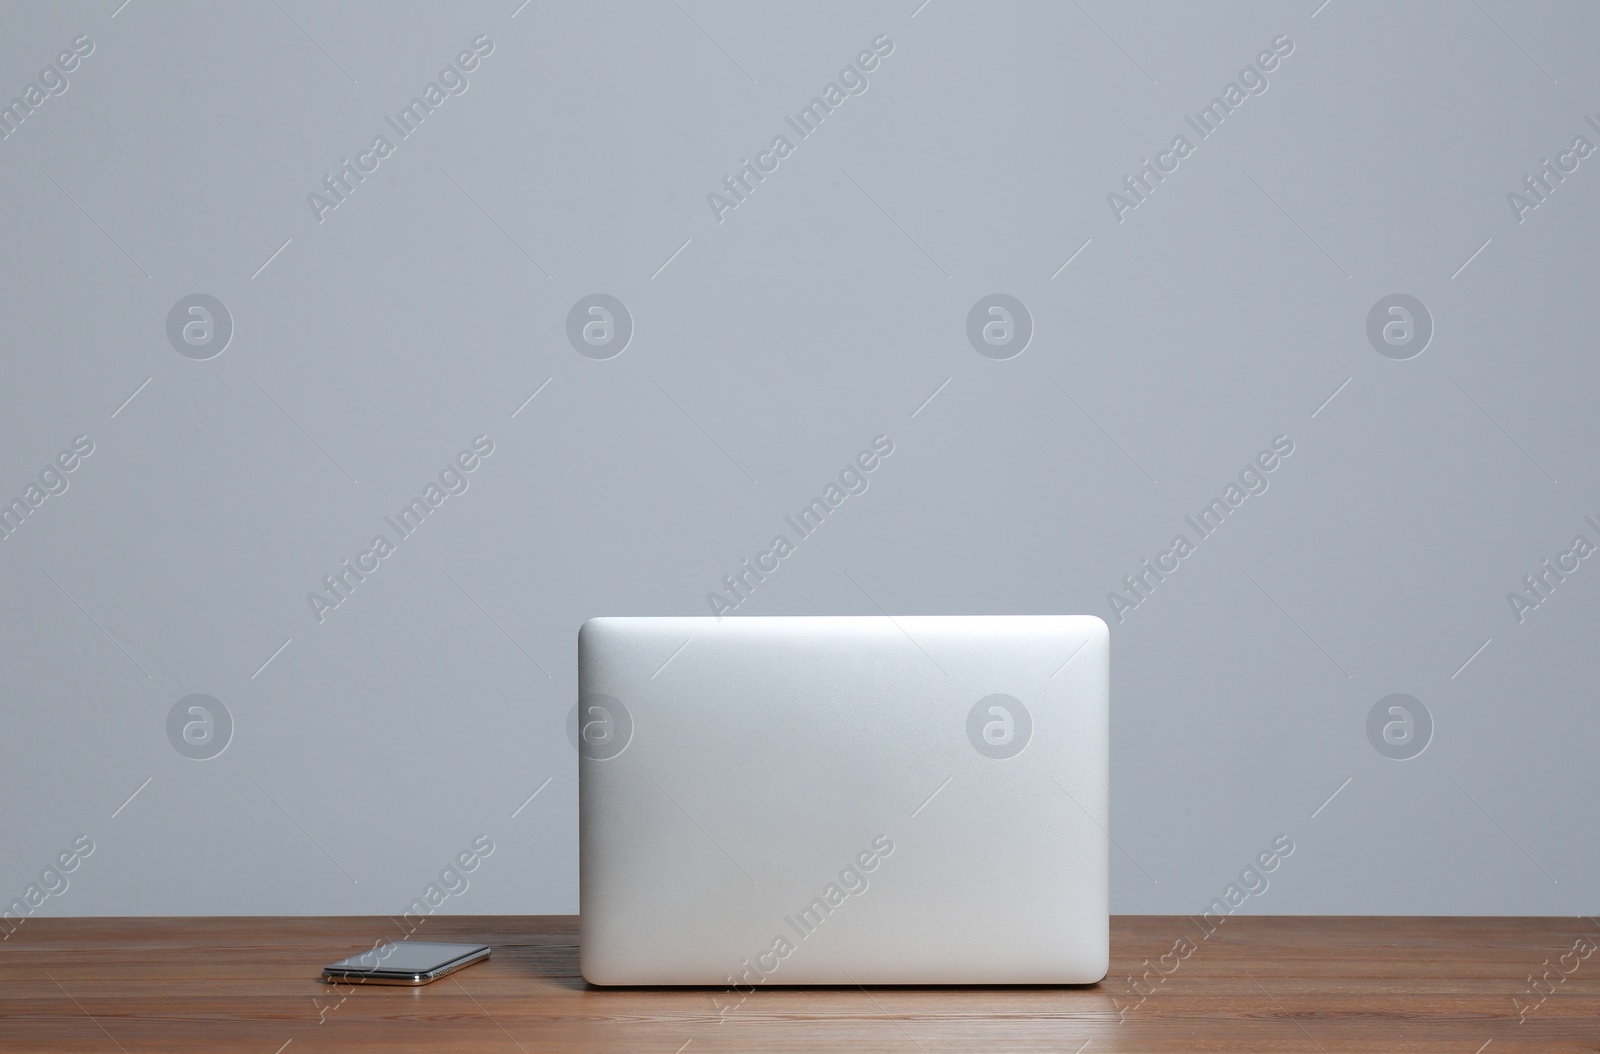 Photo of Modern laptop and mobile phone on wooden table against gray background